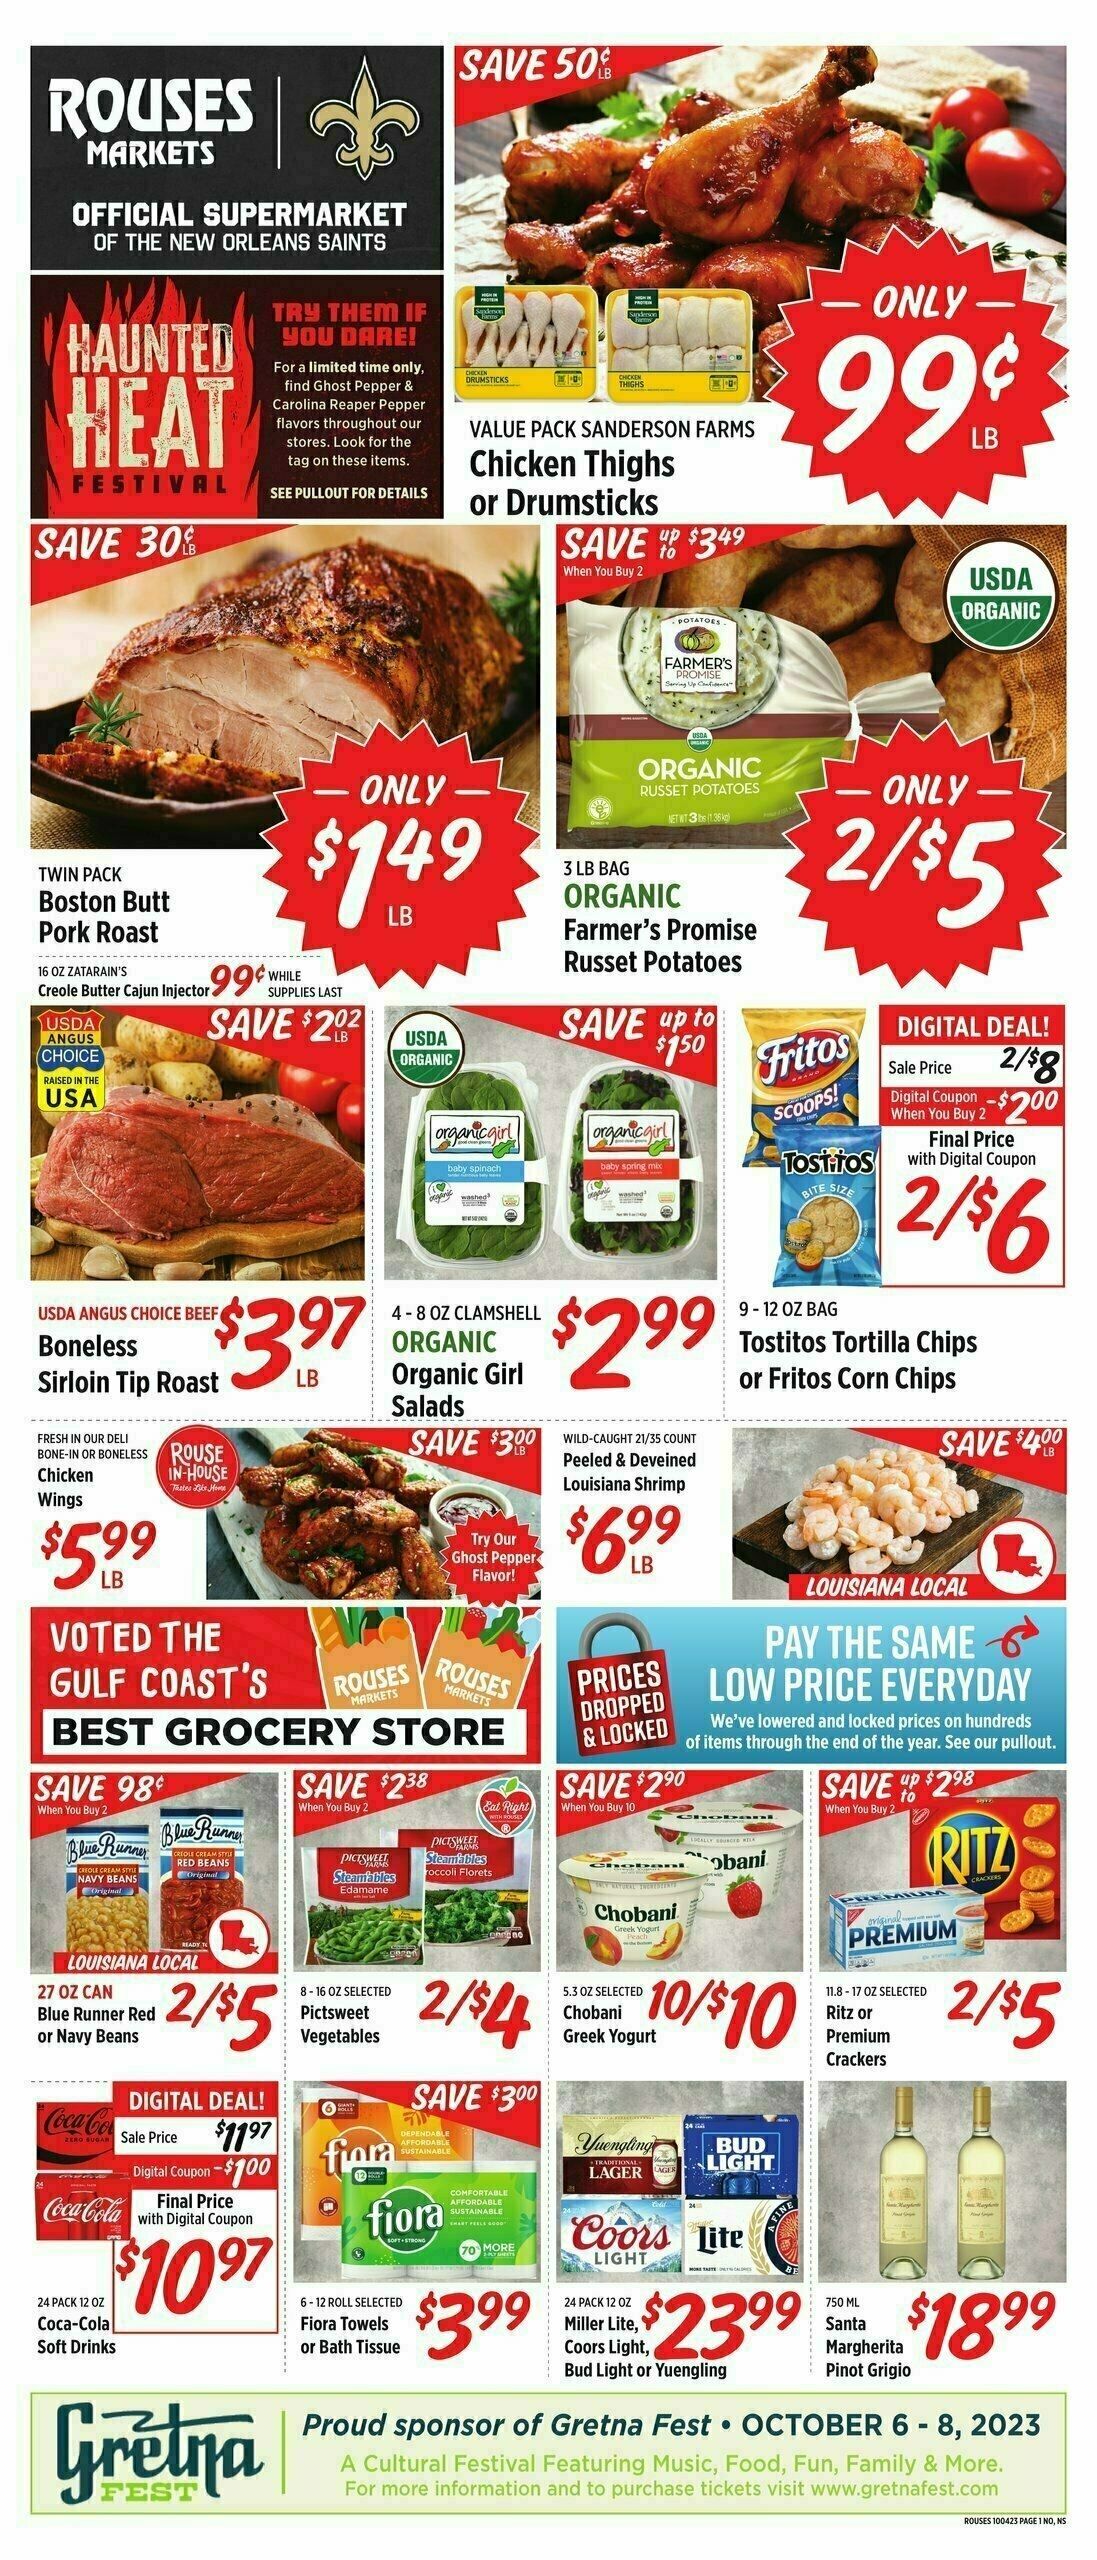 Rouses Markets Weekly Ad from October 4